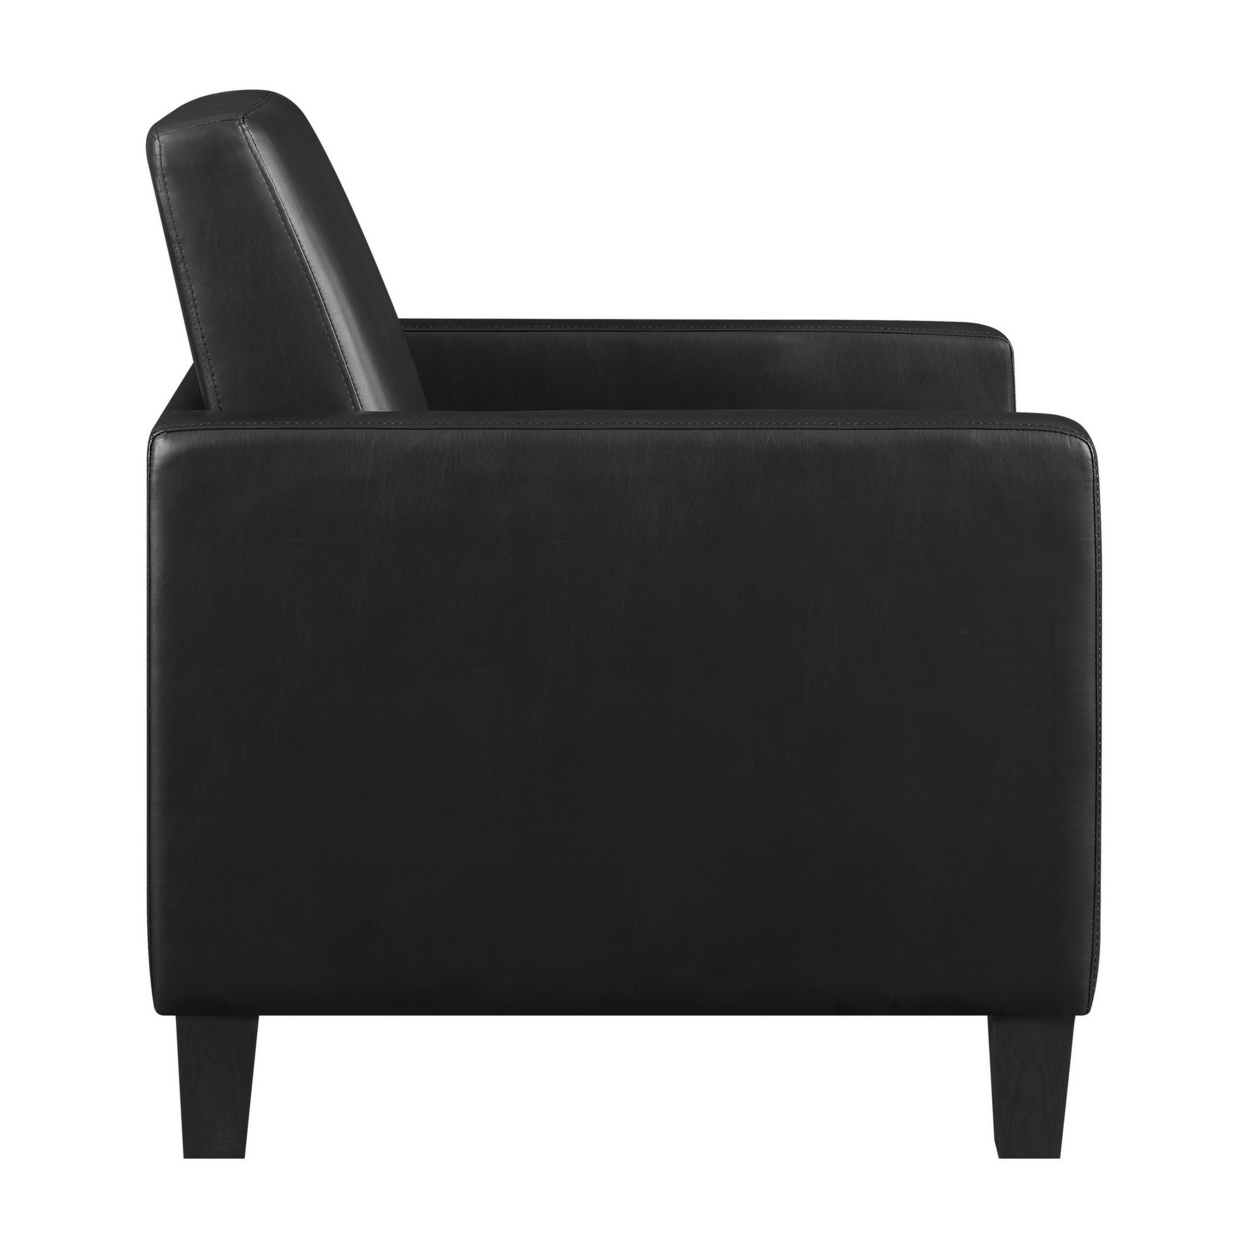 34 Inch Modern Accent Chair, Angled Back, Modern Style, Black Faux Leather- Saltoro Sherpi